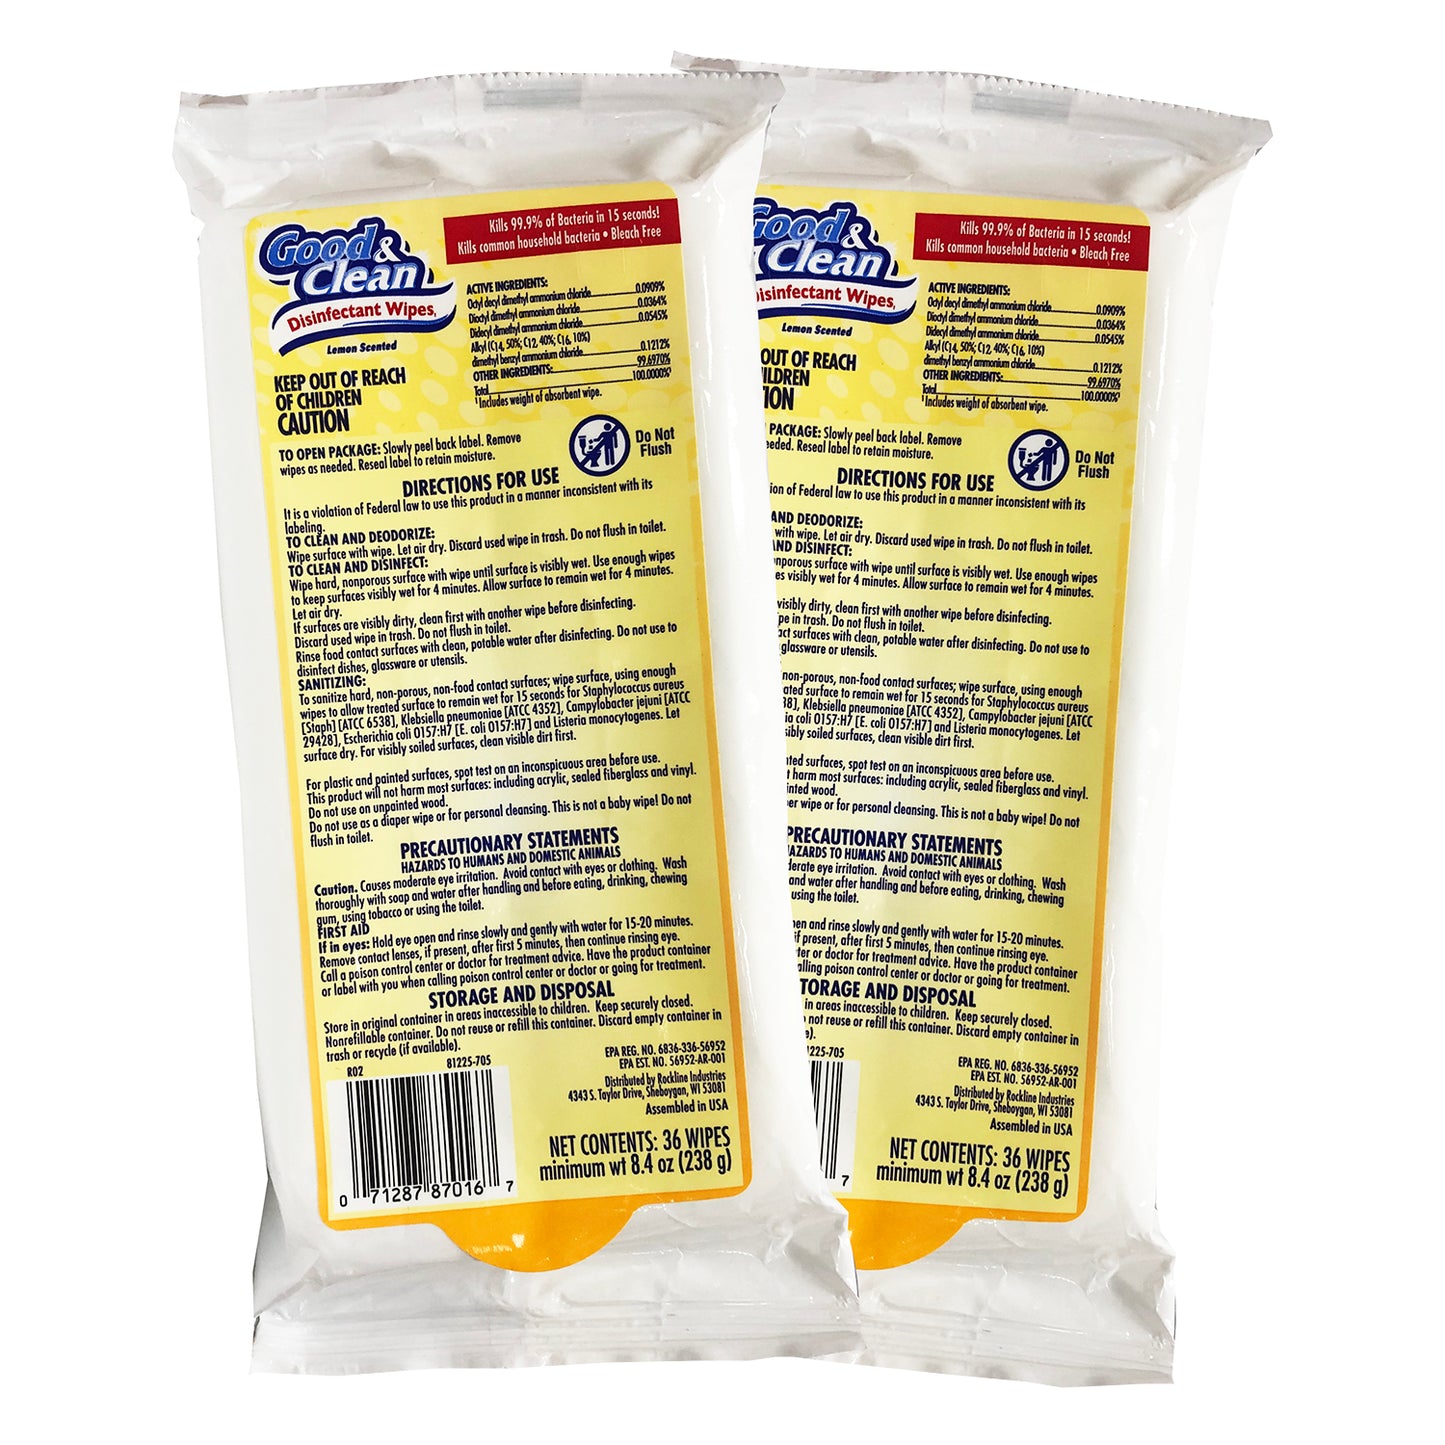 Good & Clean Disinfectant Wipes Lemon Scent 36 ct (2-PACK)